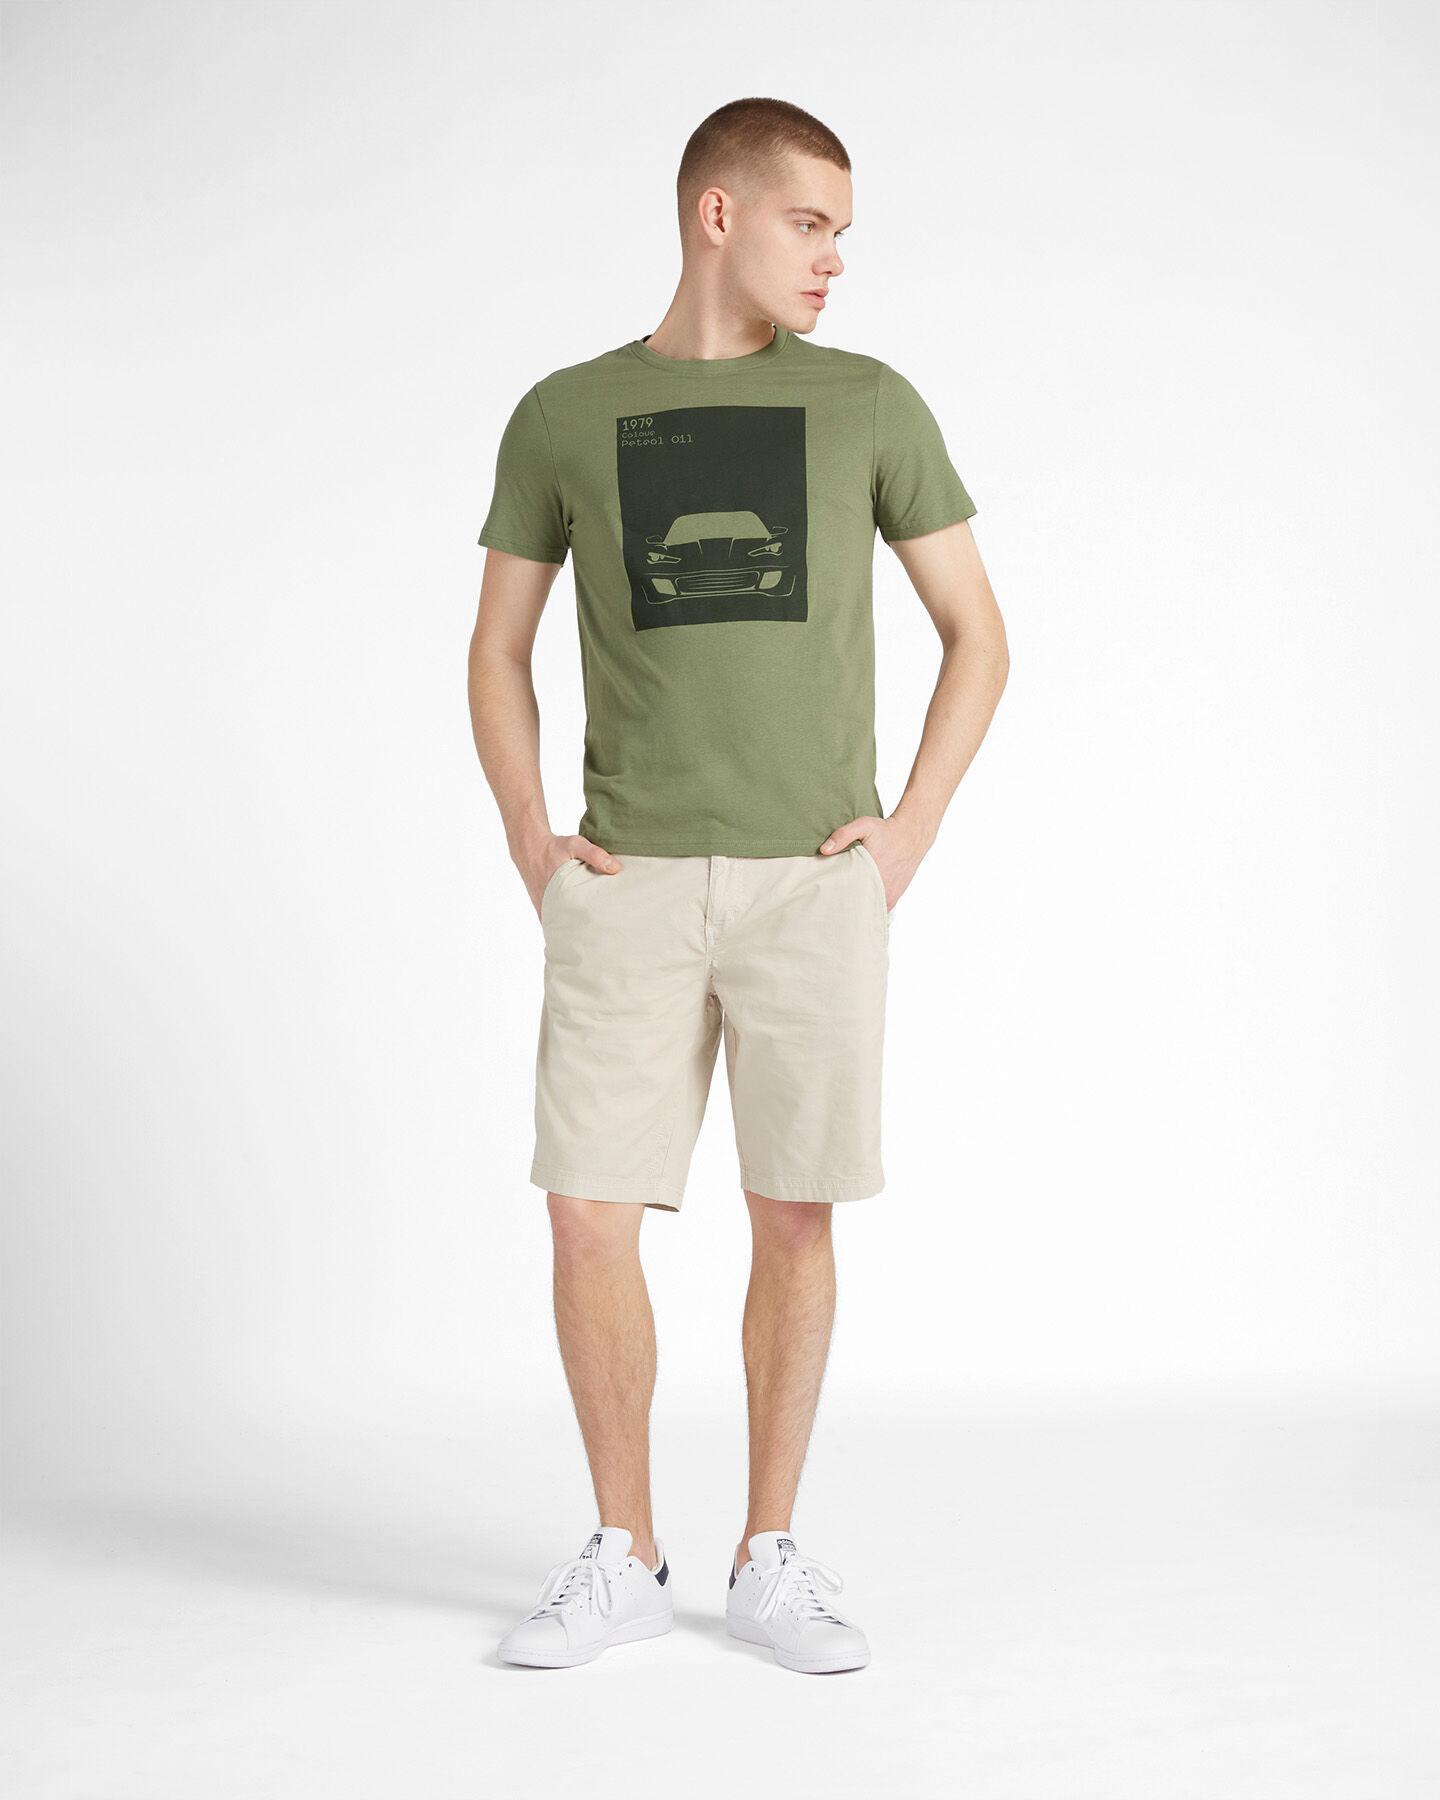  T-Shirt DACK'S BASIC COLLECTION M S4118350|838|XL scatto 1